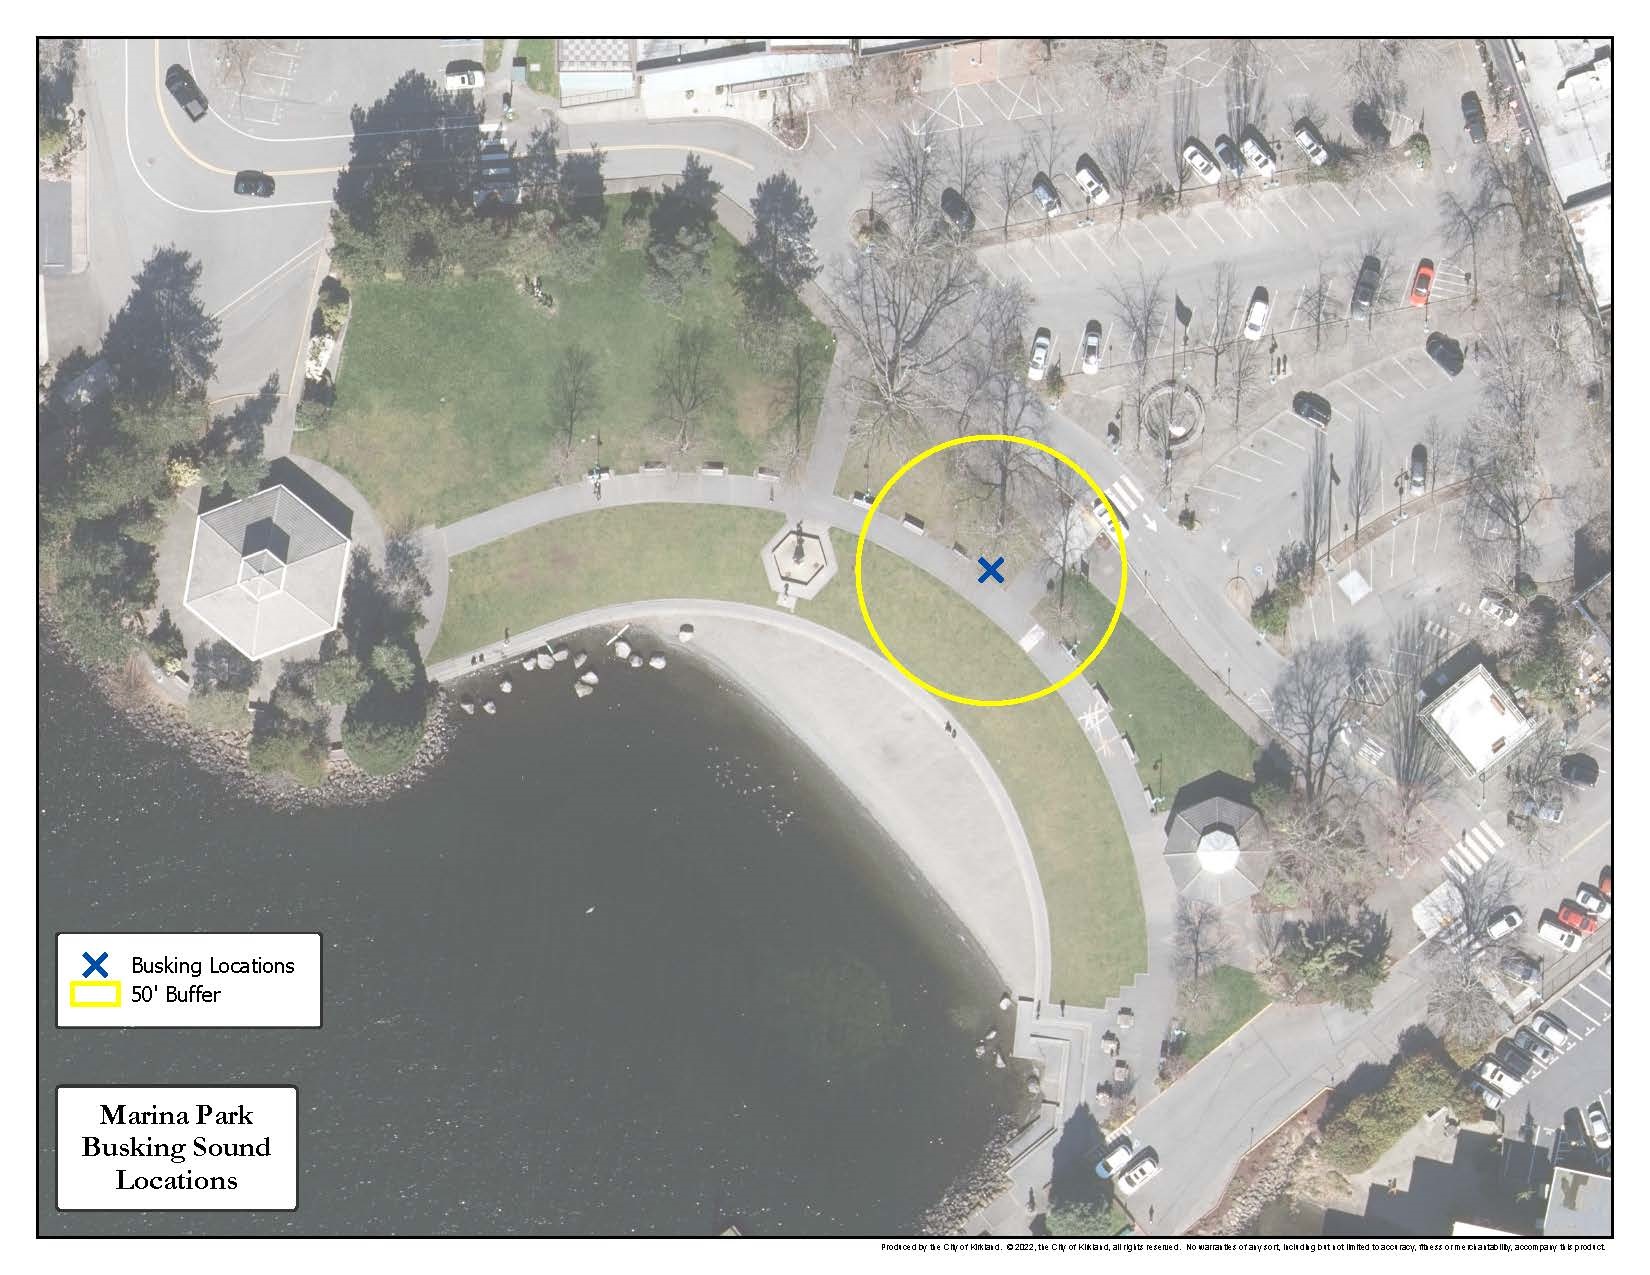 Approved Marina Park Busking Location